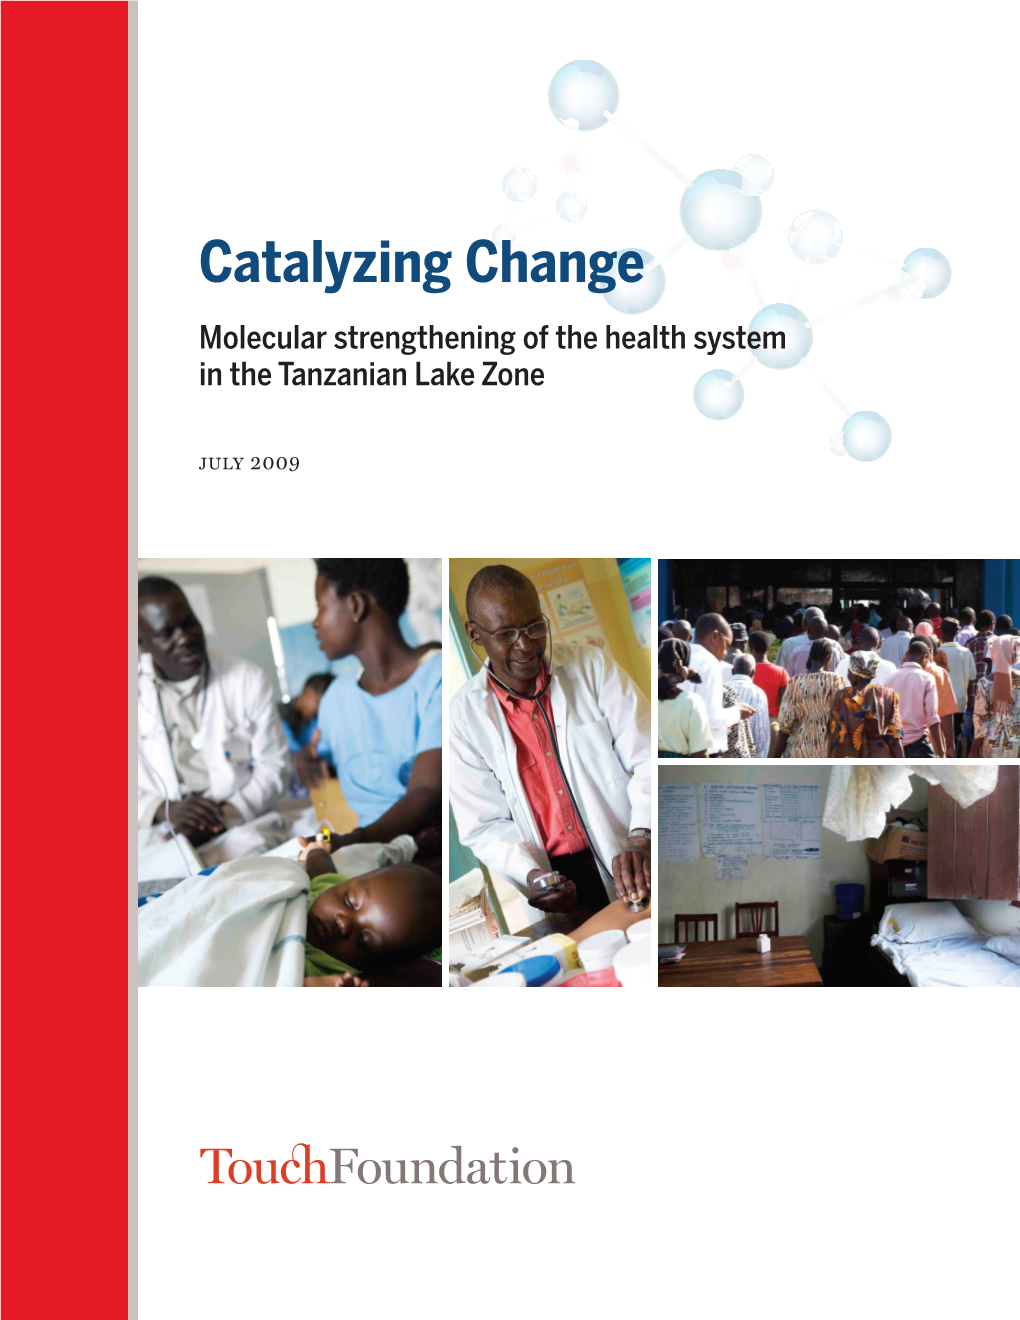 Catalyzing Change Molecular Strengthening of the Health System in the Tanzanian Lake Zone